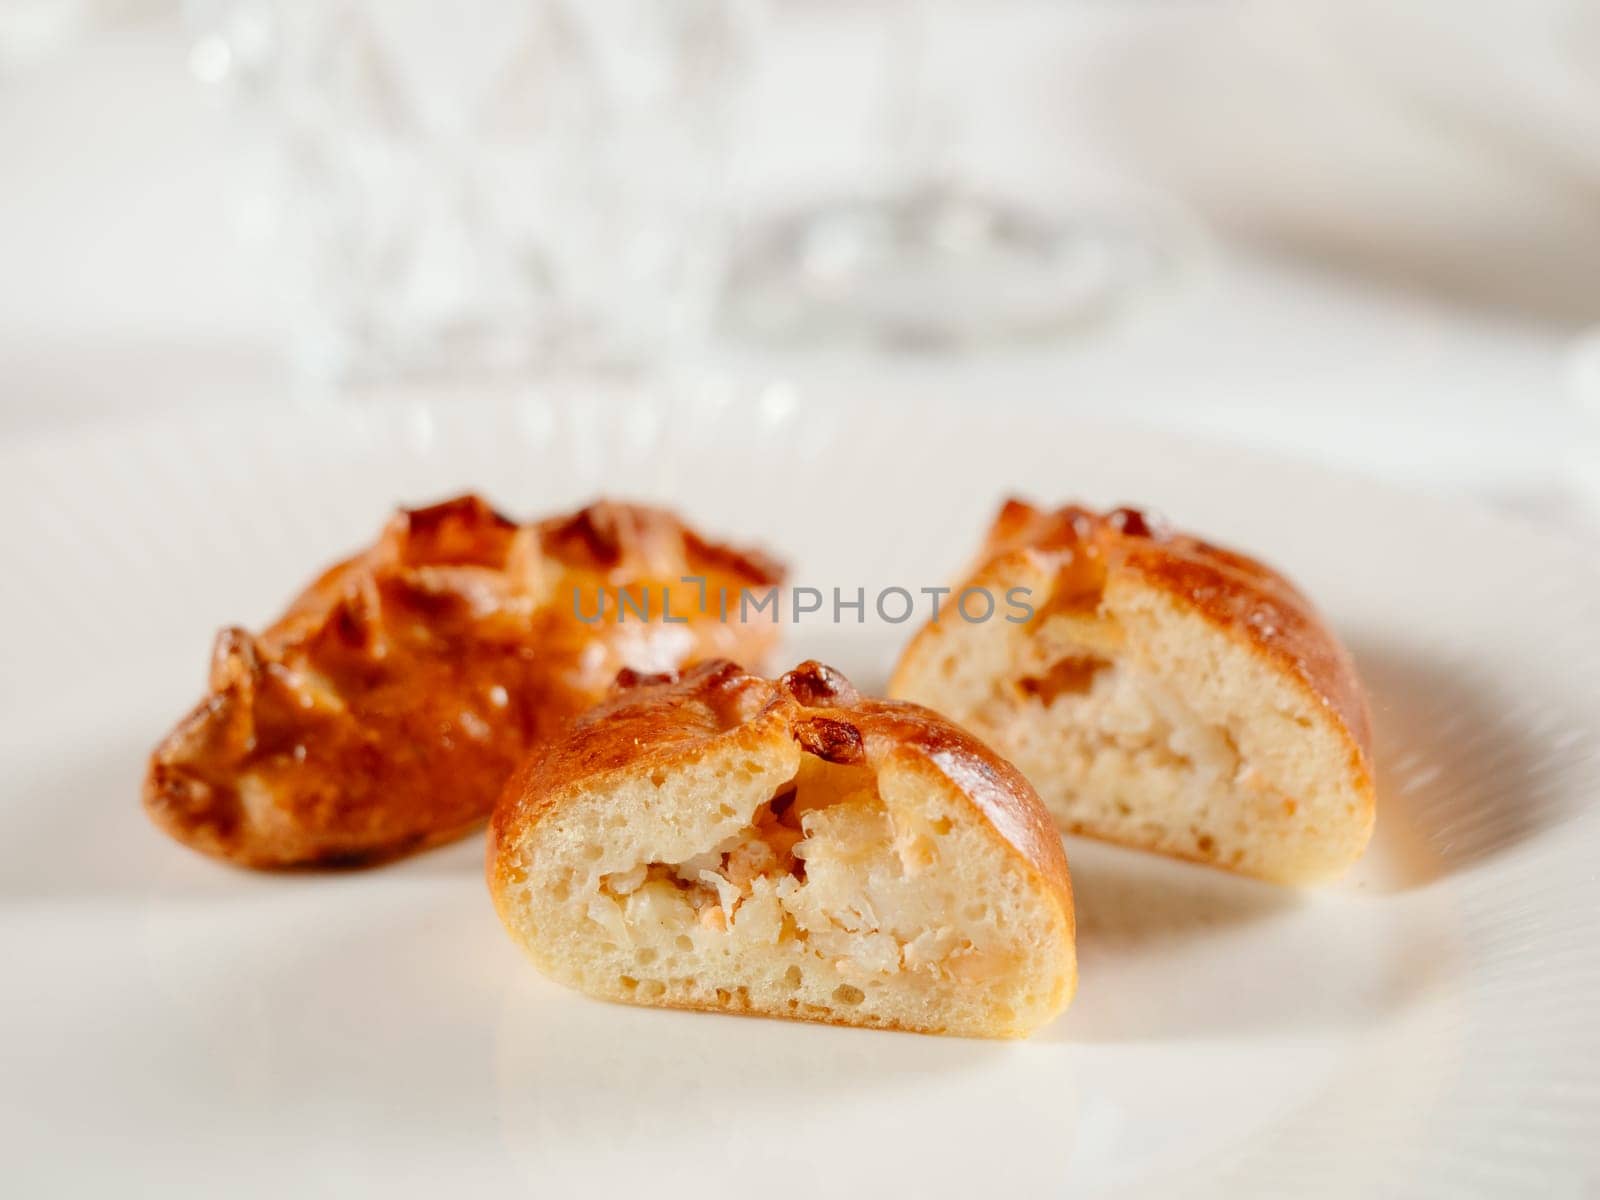 Small russian pies with minced salmon fish Russian Piroshki. Cooked tuna fish hand portioned pies or empanadas cut in half on white plate in elegant restaurant interior. Selective focus, close up.